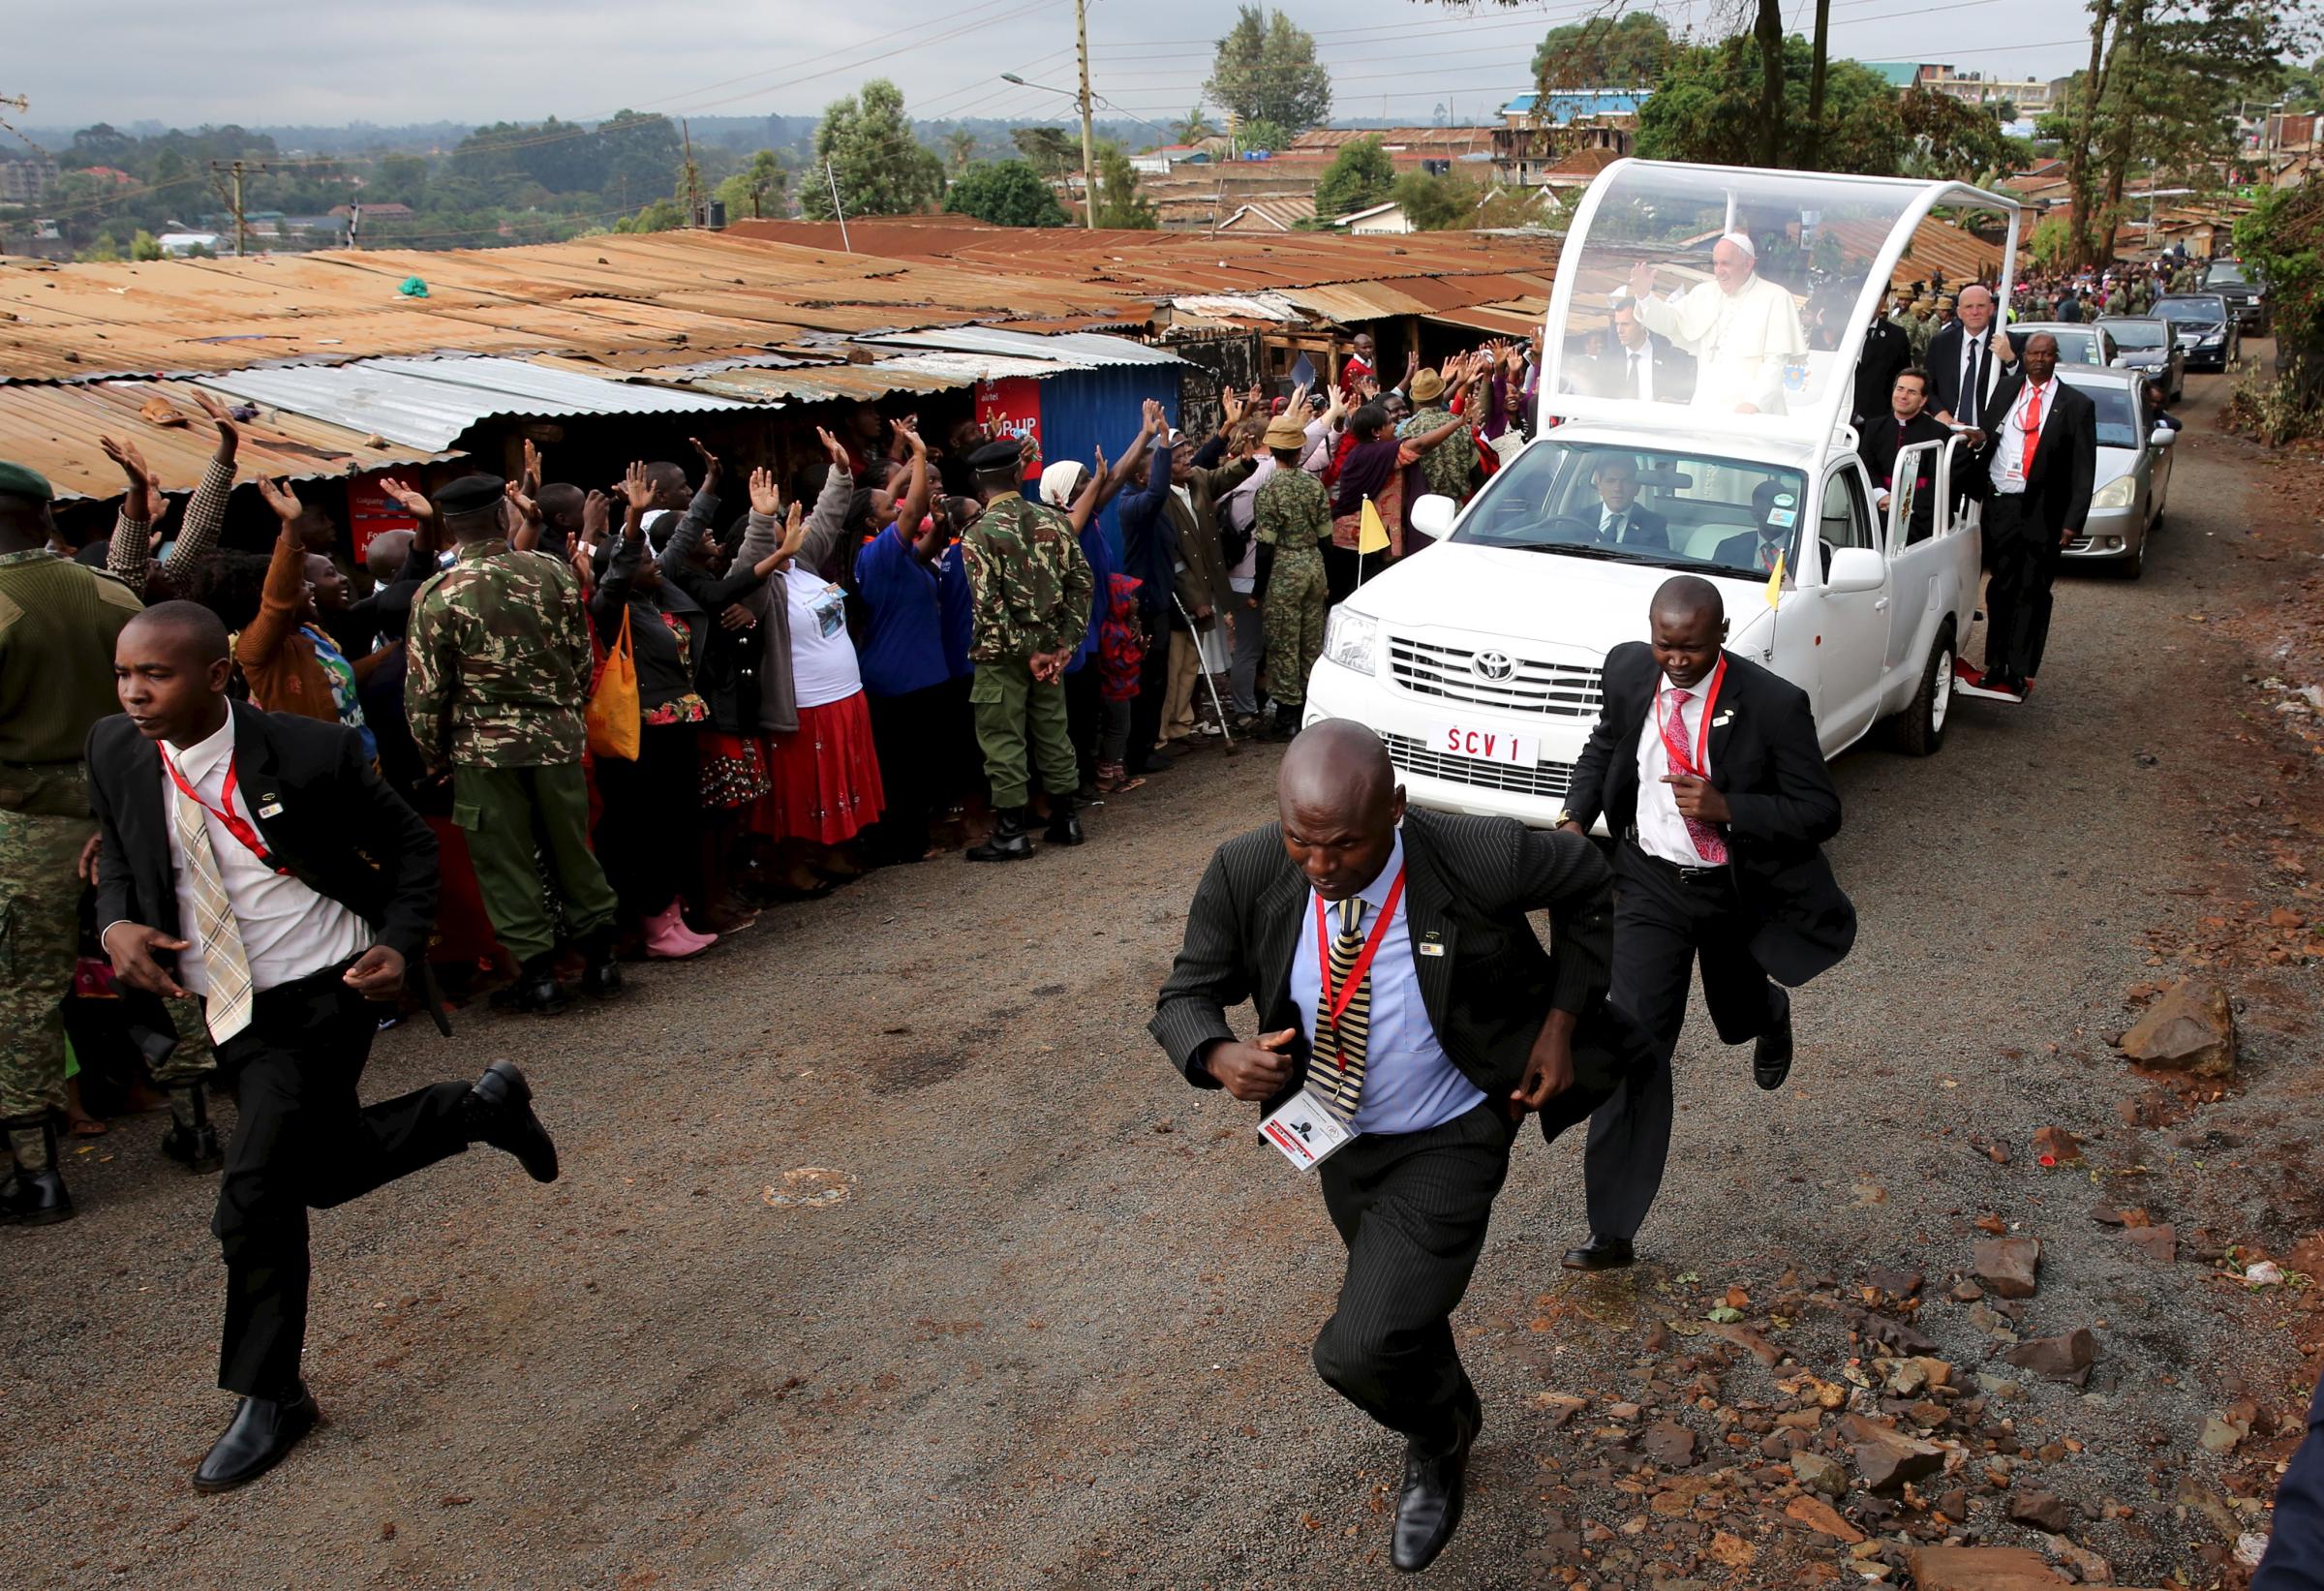 Pope Francis waves as he arrives at the Kangemi slums on the outskirts of Kenya's capital Nairobi